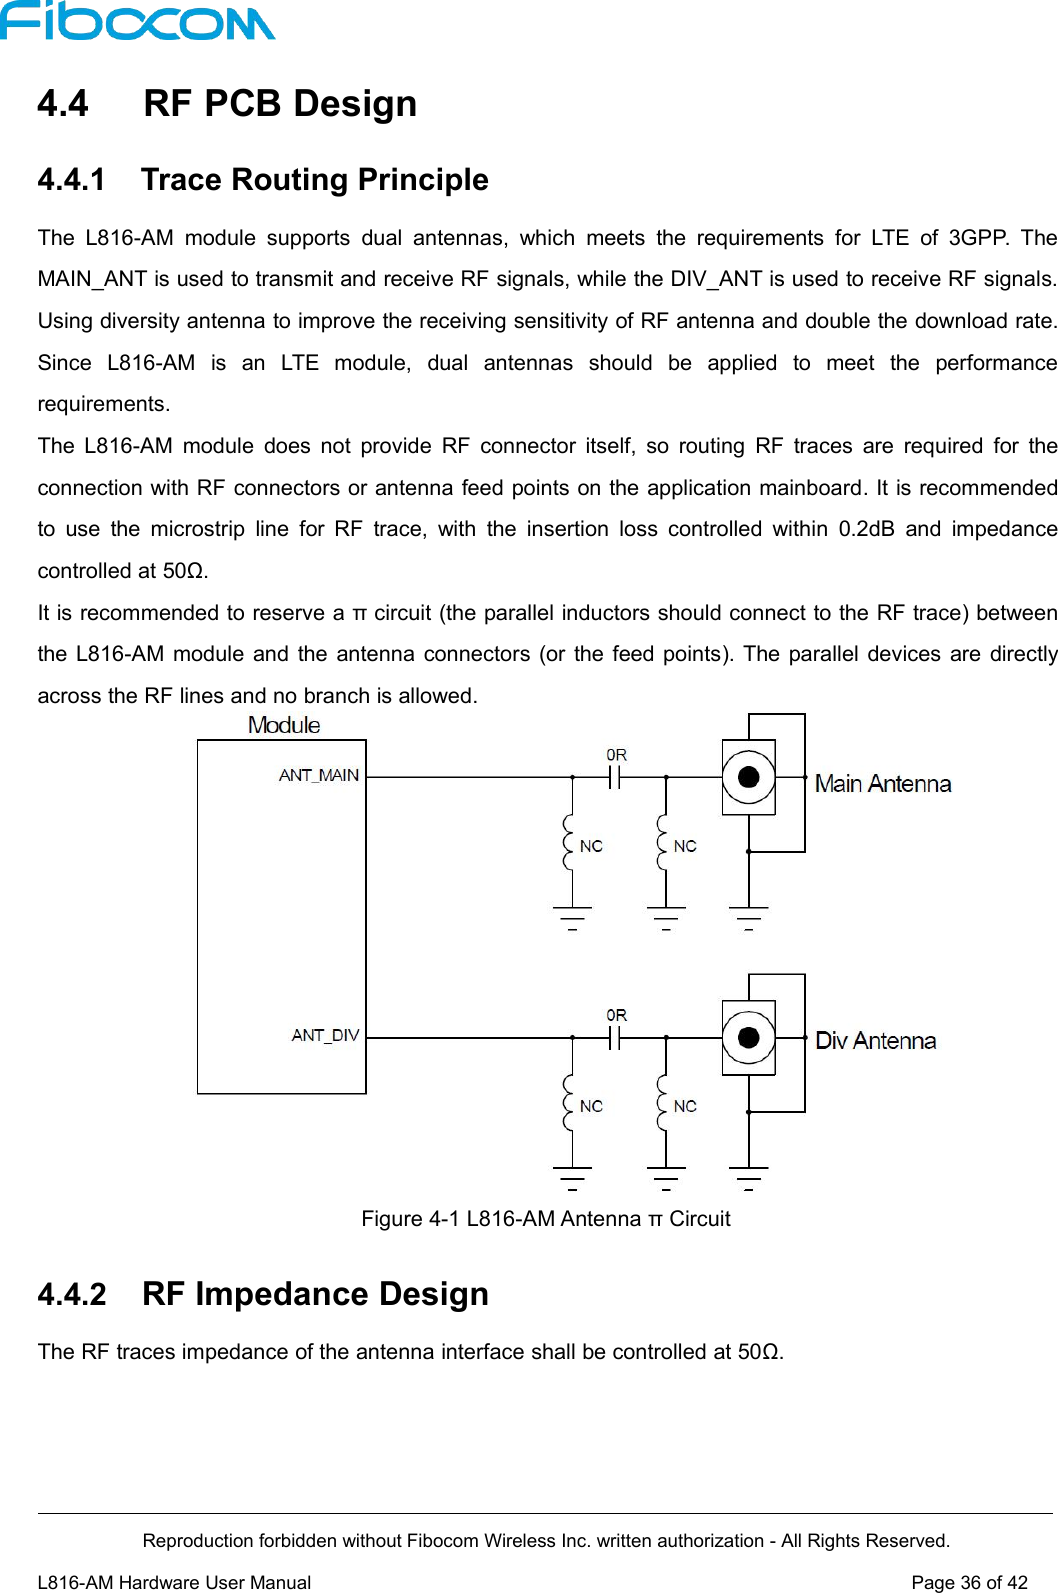 Reproduction forbidden without Fibocom Wireless Inc. written authorization - All Rights Reserved.L816-AM Hardware User Manual Page36of424.4 RF PCB Design4.4.1 Trace Routing PrincipleThe L816-AM module supports dual antennas, which meets the requirements for LTE of 3GPP. TheMAIN_ANT is used to transmit and receive RF signals, while the DIV_ANT is used to receive RF signals.Using diversity antenna to improve the receiving sensitivity of RF antenna and double the download rate.Since L816-AM is an LTE module, dual antennas should be applied to meet the performancerequirements.The L816-AM module does not provide RF connector itself, so routing RF traces are required for theconnection with RF connectors or antenna feed points on the application mainboard. It is recommendedto use the microstrip line for RF trace, with the insertion loss controlled within 0.2dB and impedancecontrolled at 50Ω.It is recommended to reserve a π circuit (the parallel inductors should connect to the RF trace) betweenthe L816-AM module and the antenna connectors (or the feed points). The parallel devices are directlyacross the RF lines and no branch is allowed.Figure 4-1 L816-AM Antenna π Circuit4.4.2 RF Impedance DesignThe RF traces impedance of the antenna interface shall be controlled at 50Ω.